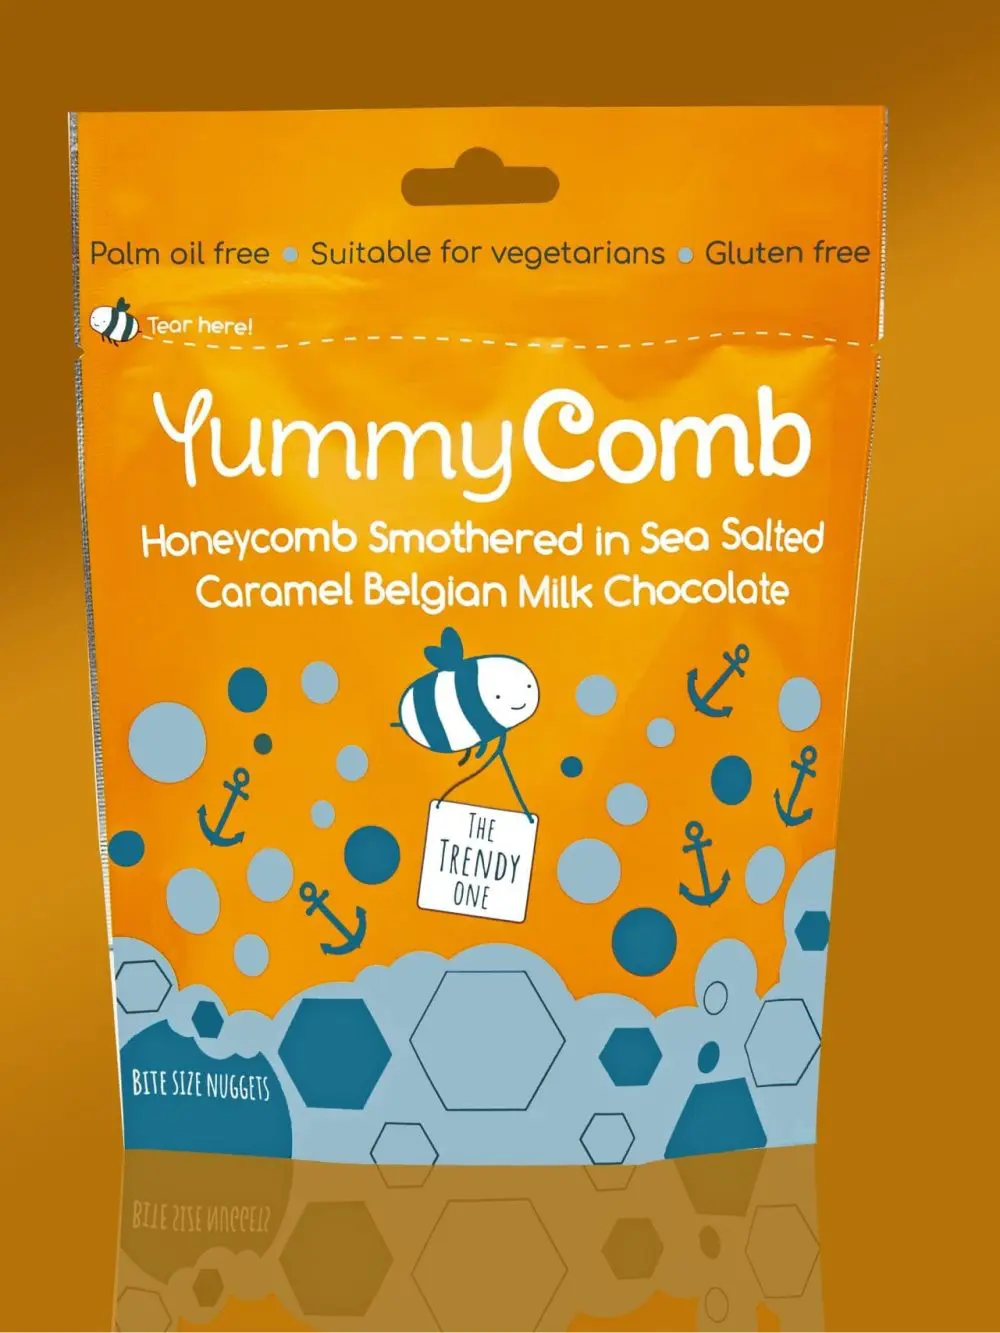 Gluten free Yummycomb Honeycomb bites smothered in Sea Salted Caramel Belgian chocolate pouch bag 100g